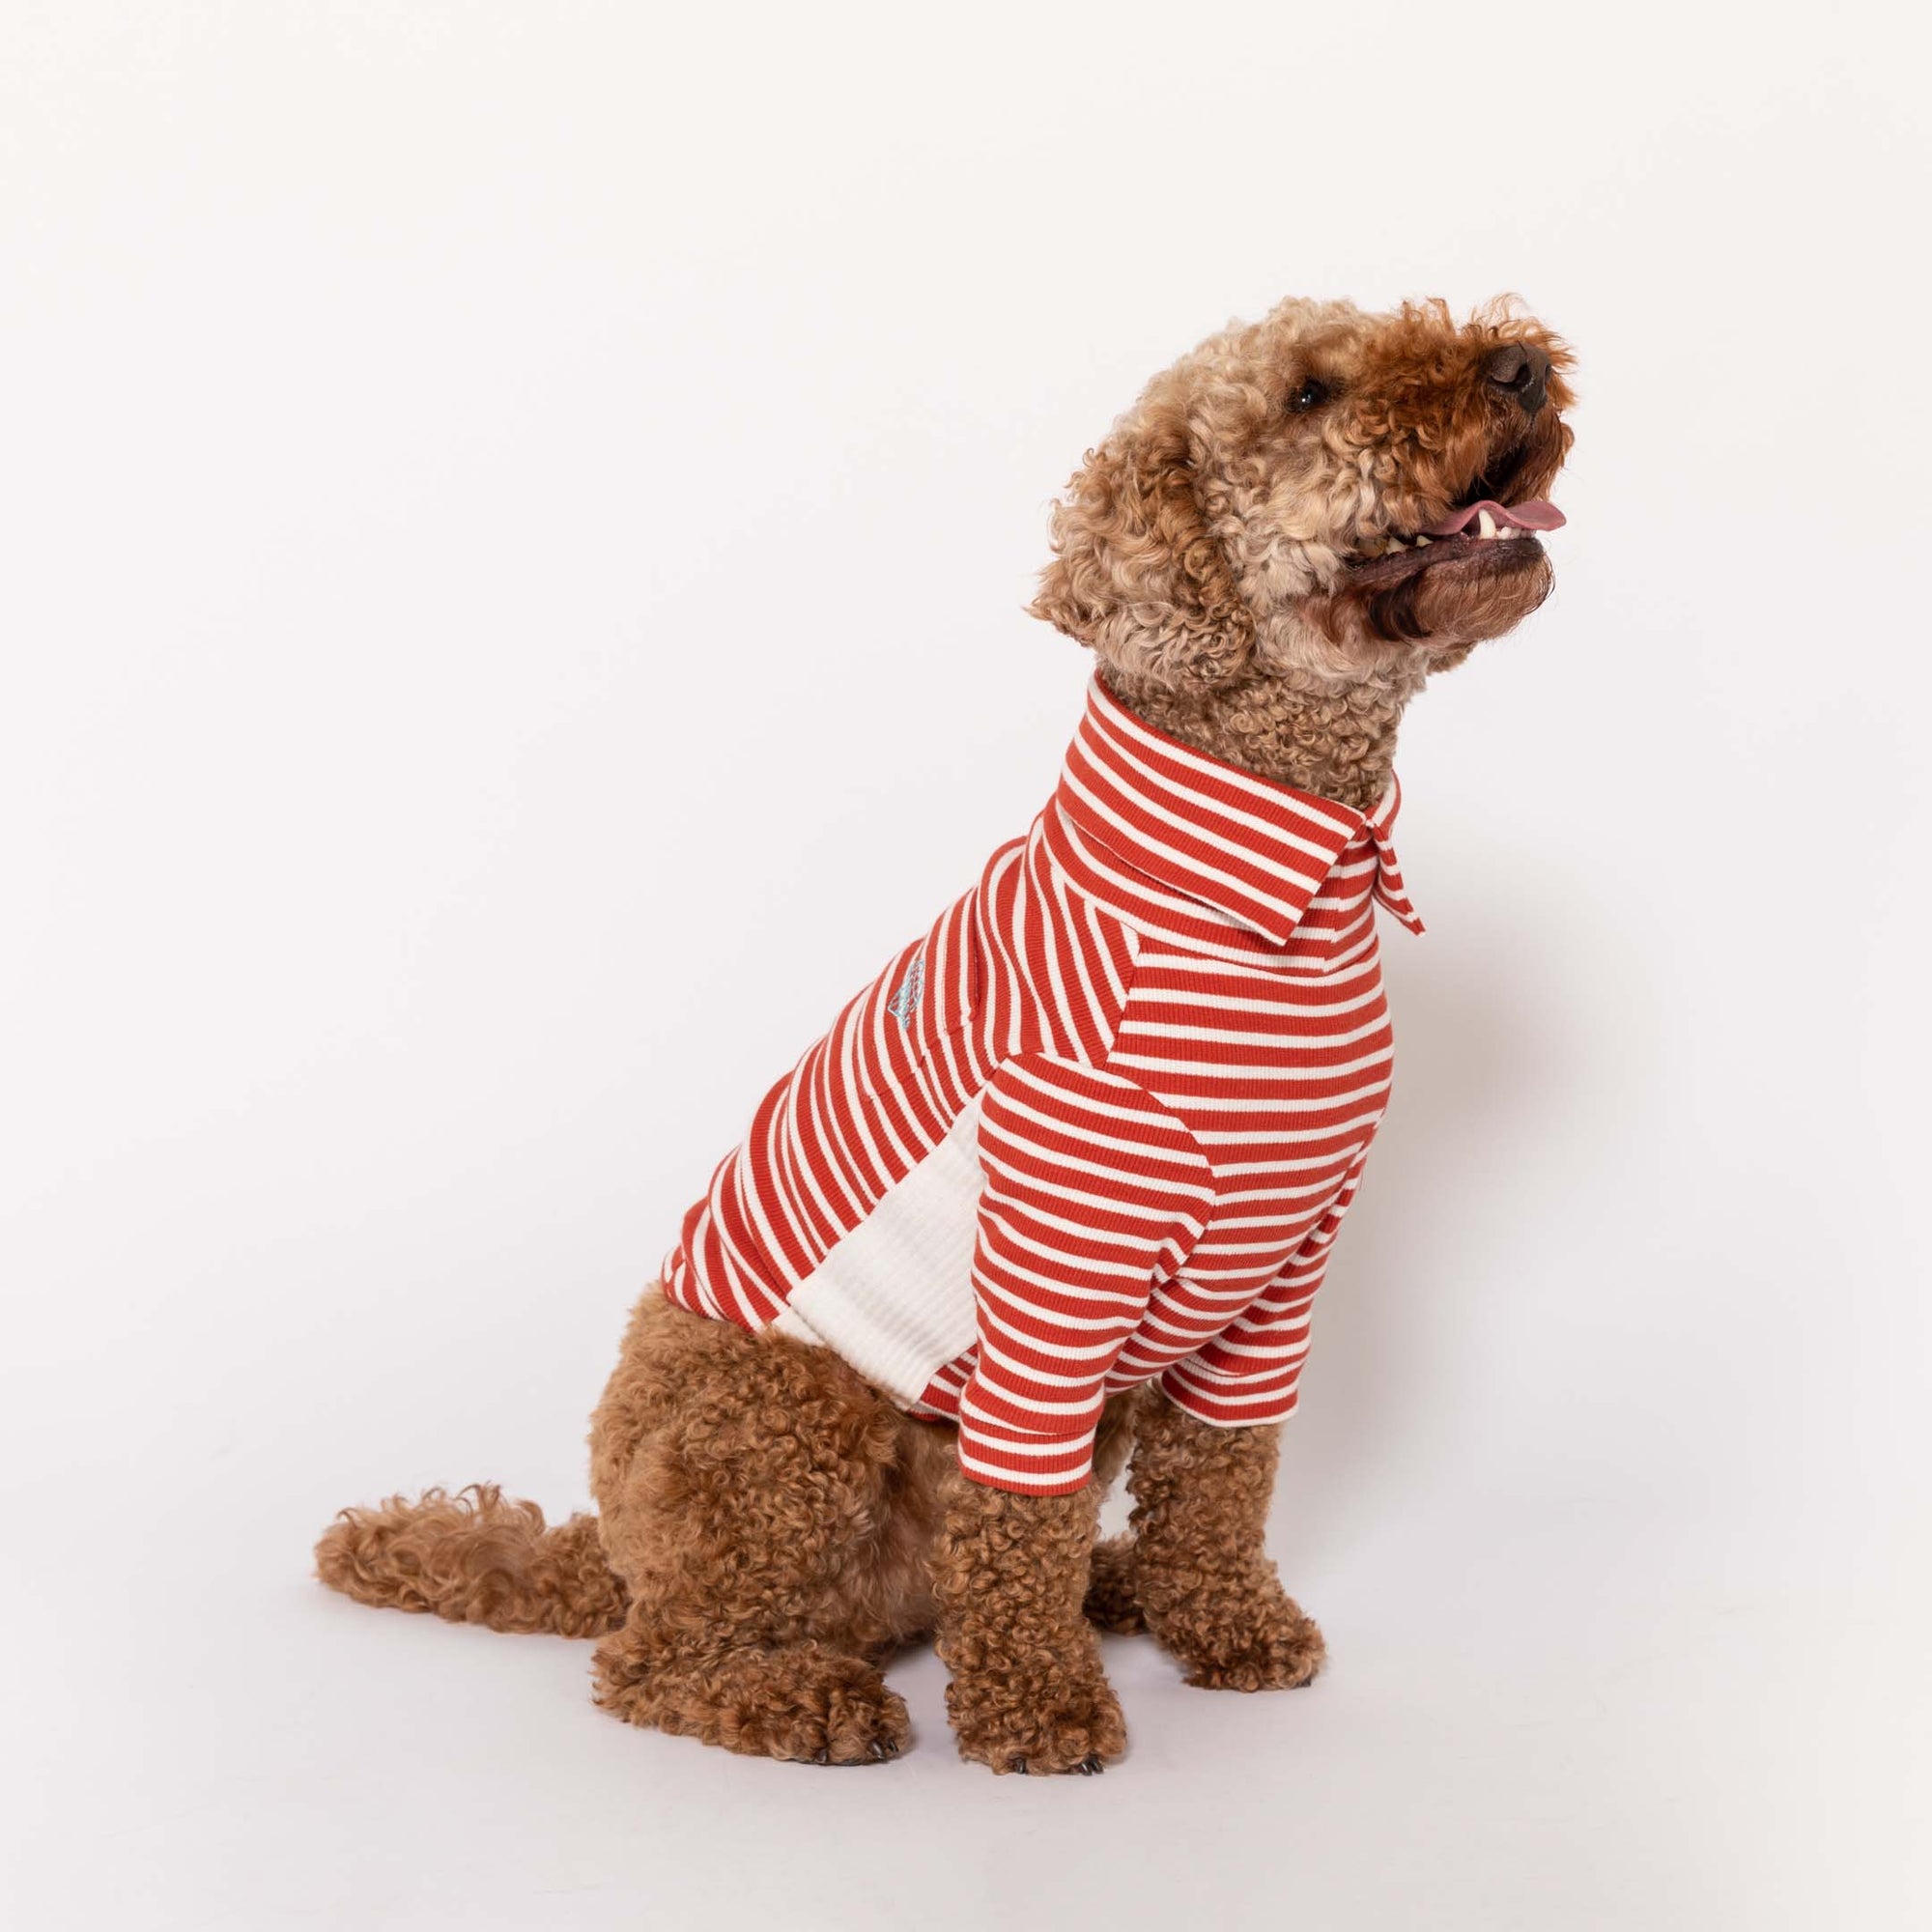 Happy Poodle in a Rust & Ivory  striped shirt with emblem, perfect for trendy dog appare